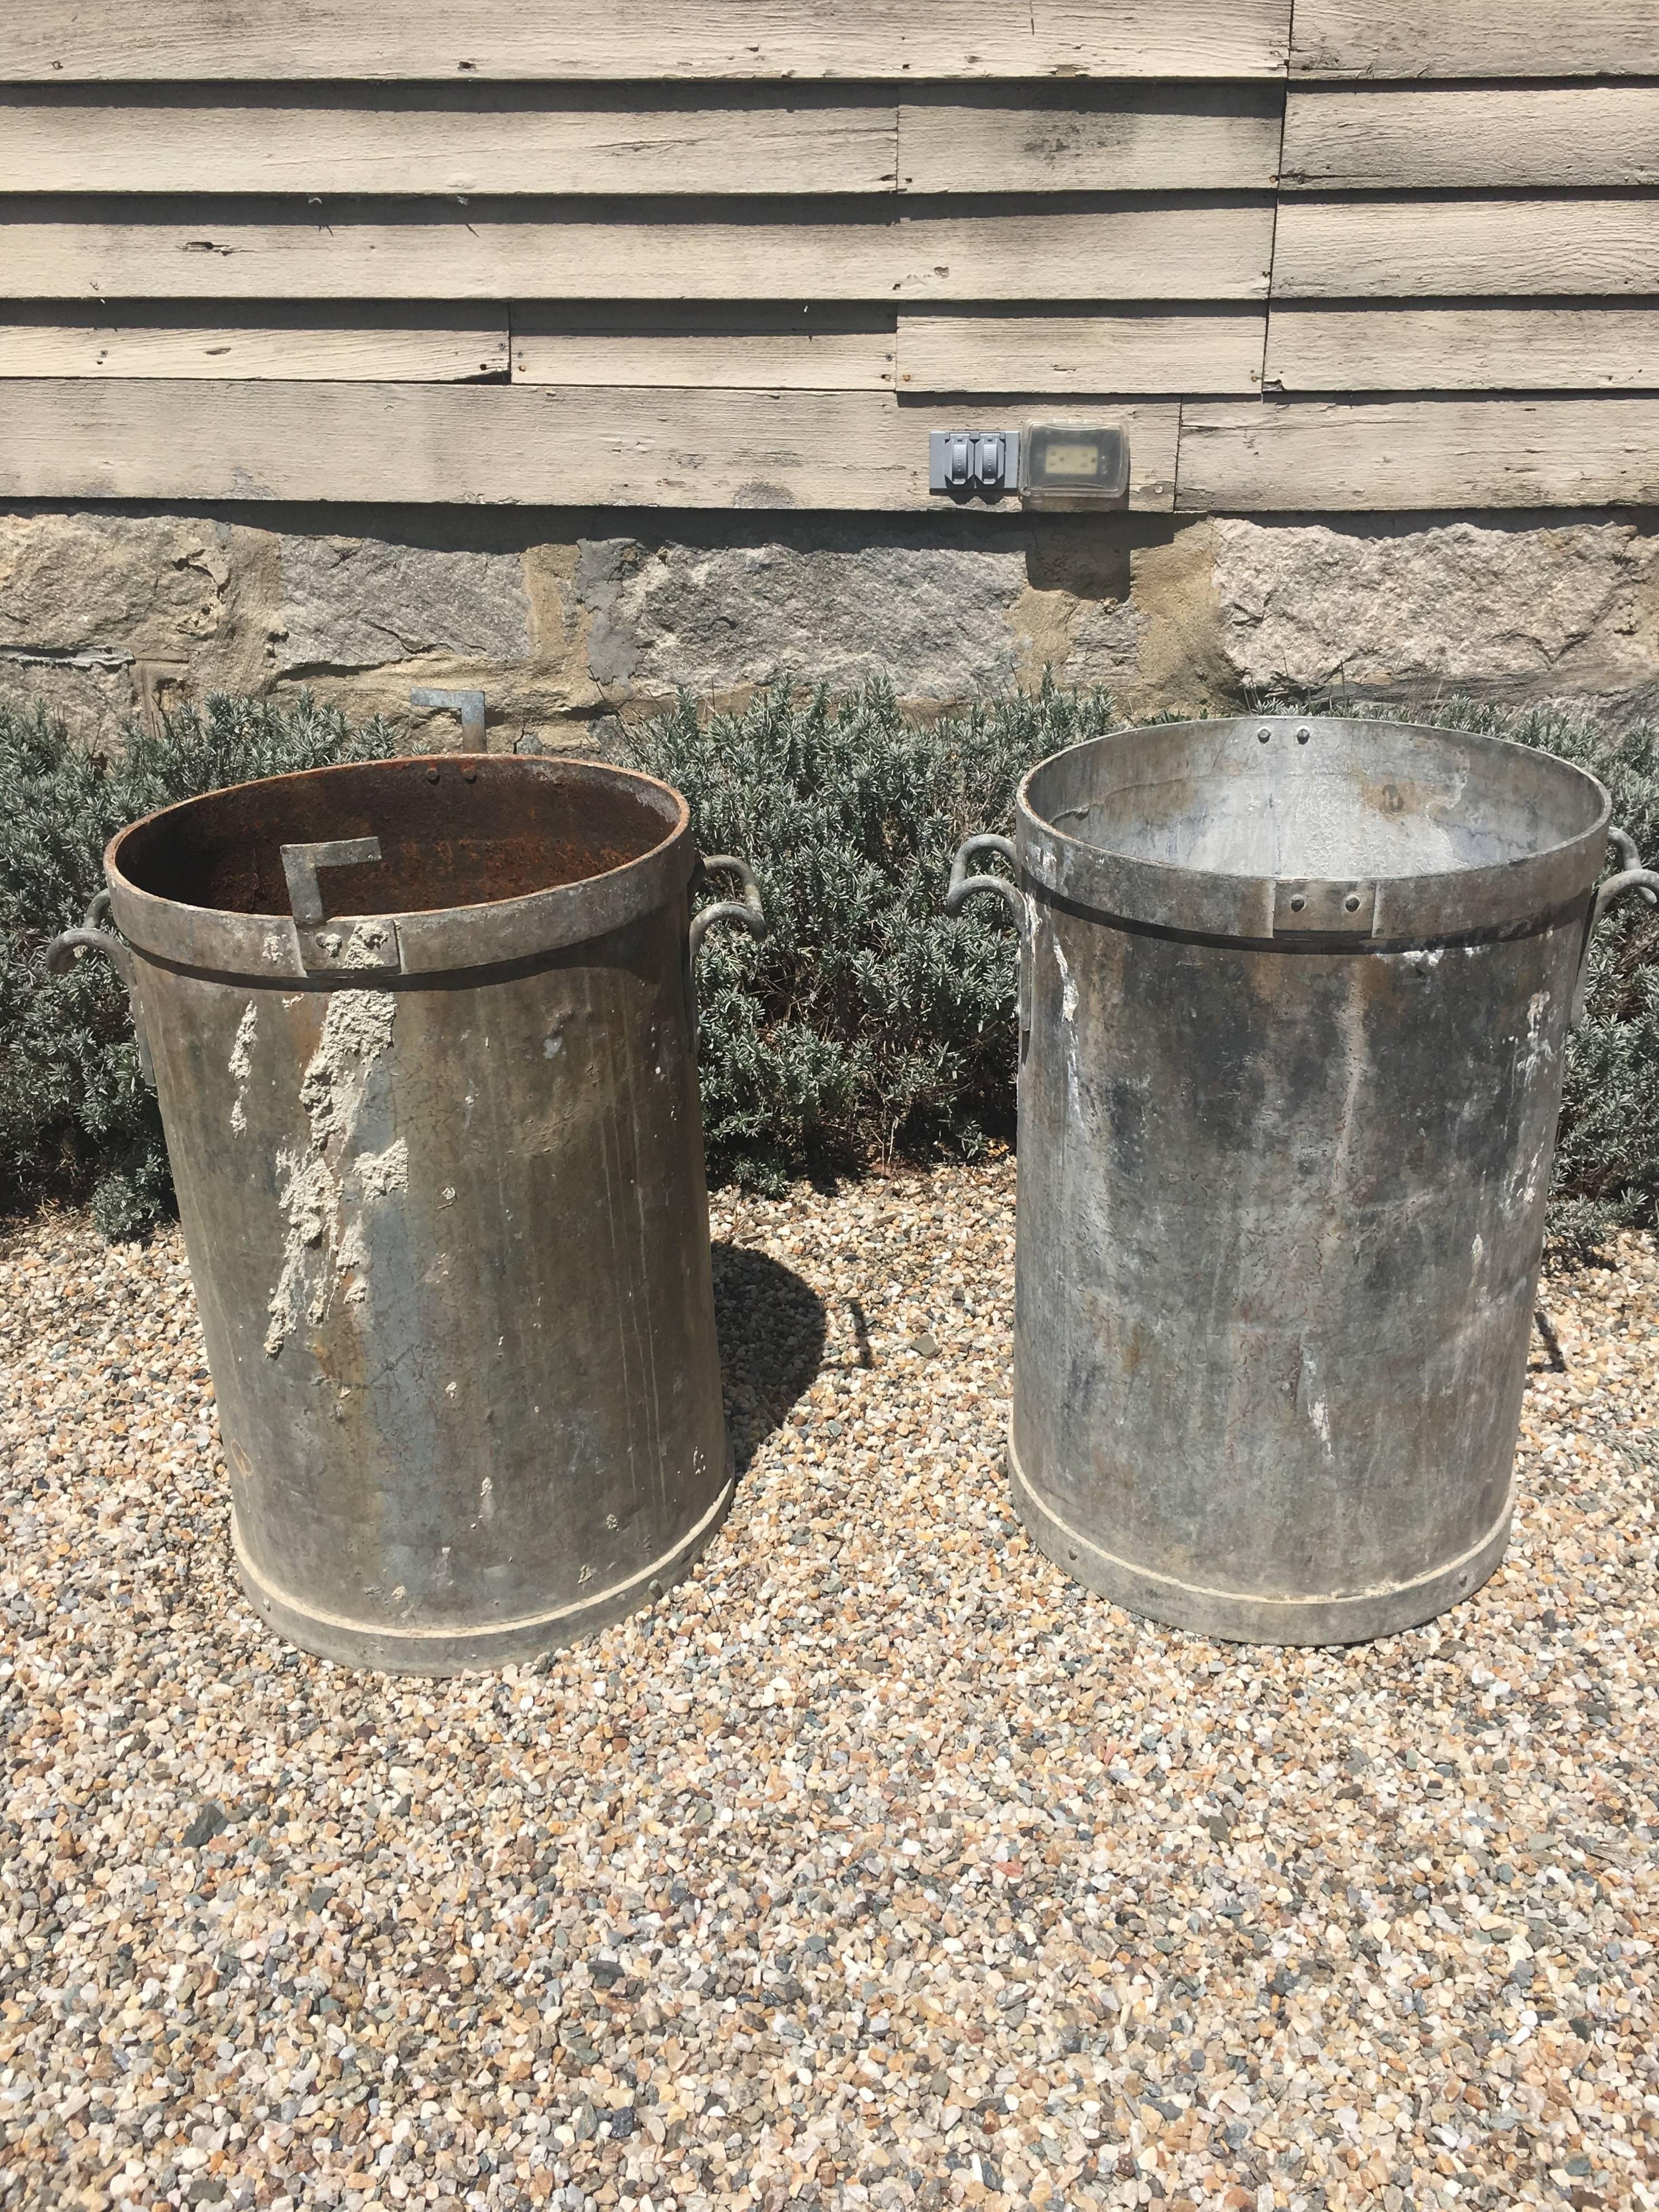 These industrial tubs have clean, sleek lines that make them the perfect planters for a contemporary garden. The riveted handles are exceptional and if you're not keen on the surface, they can always be painted to your specifications or just cleaned